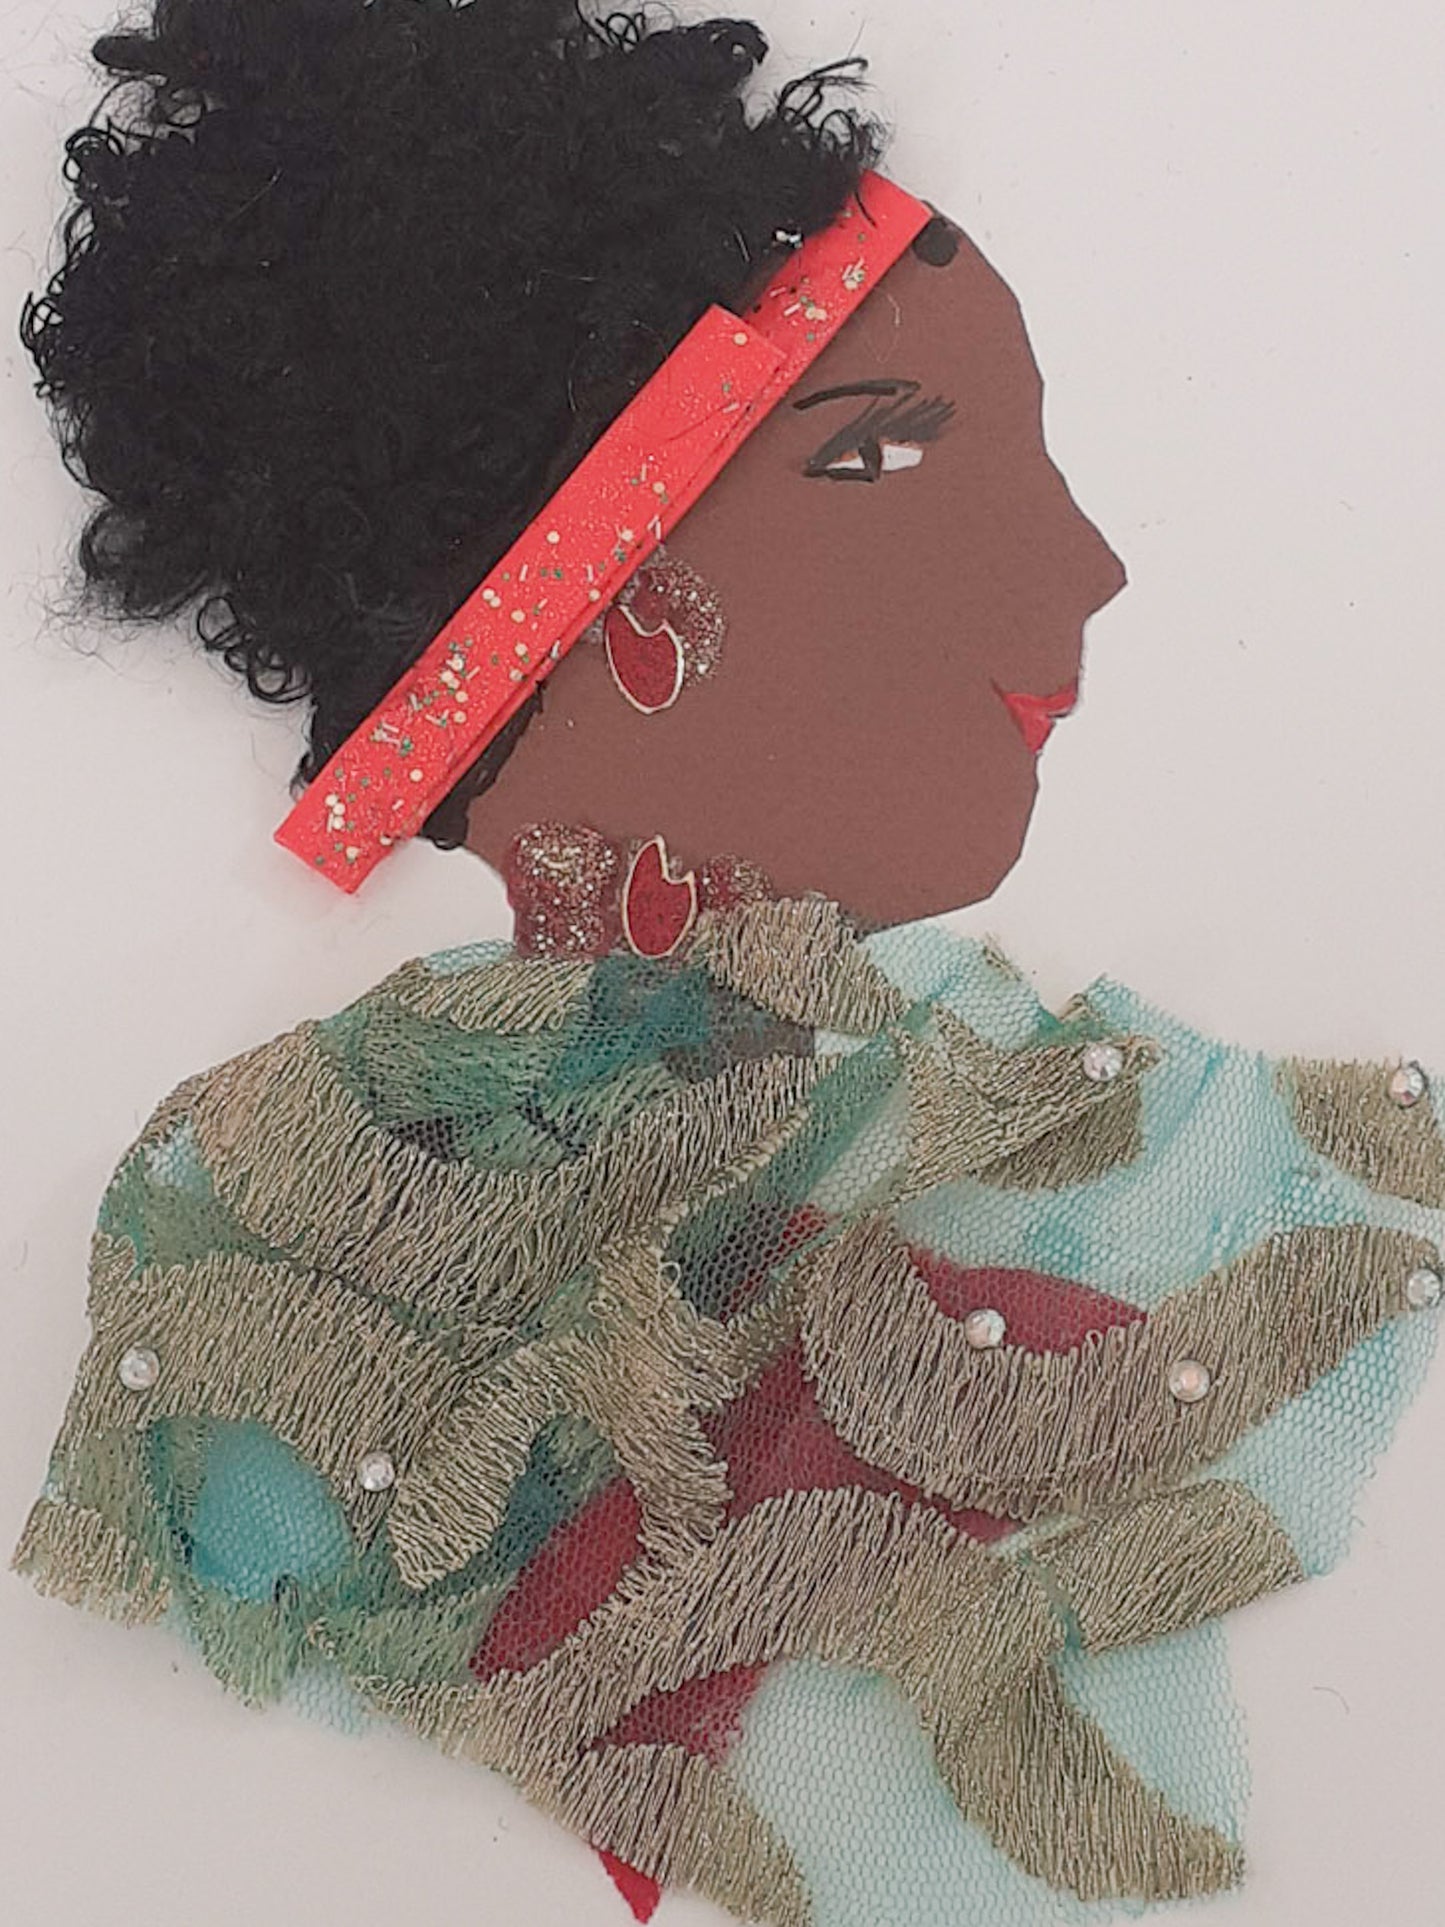 This card is of a woman named Tiffany. Tiffany wears a blue chiffon material blouse with embroidery on it. In her black curly hair, she wears a bright red headband. 